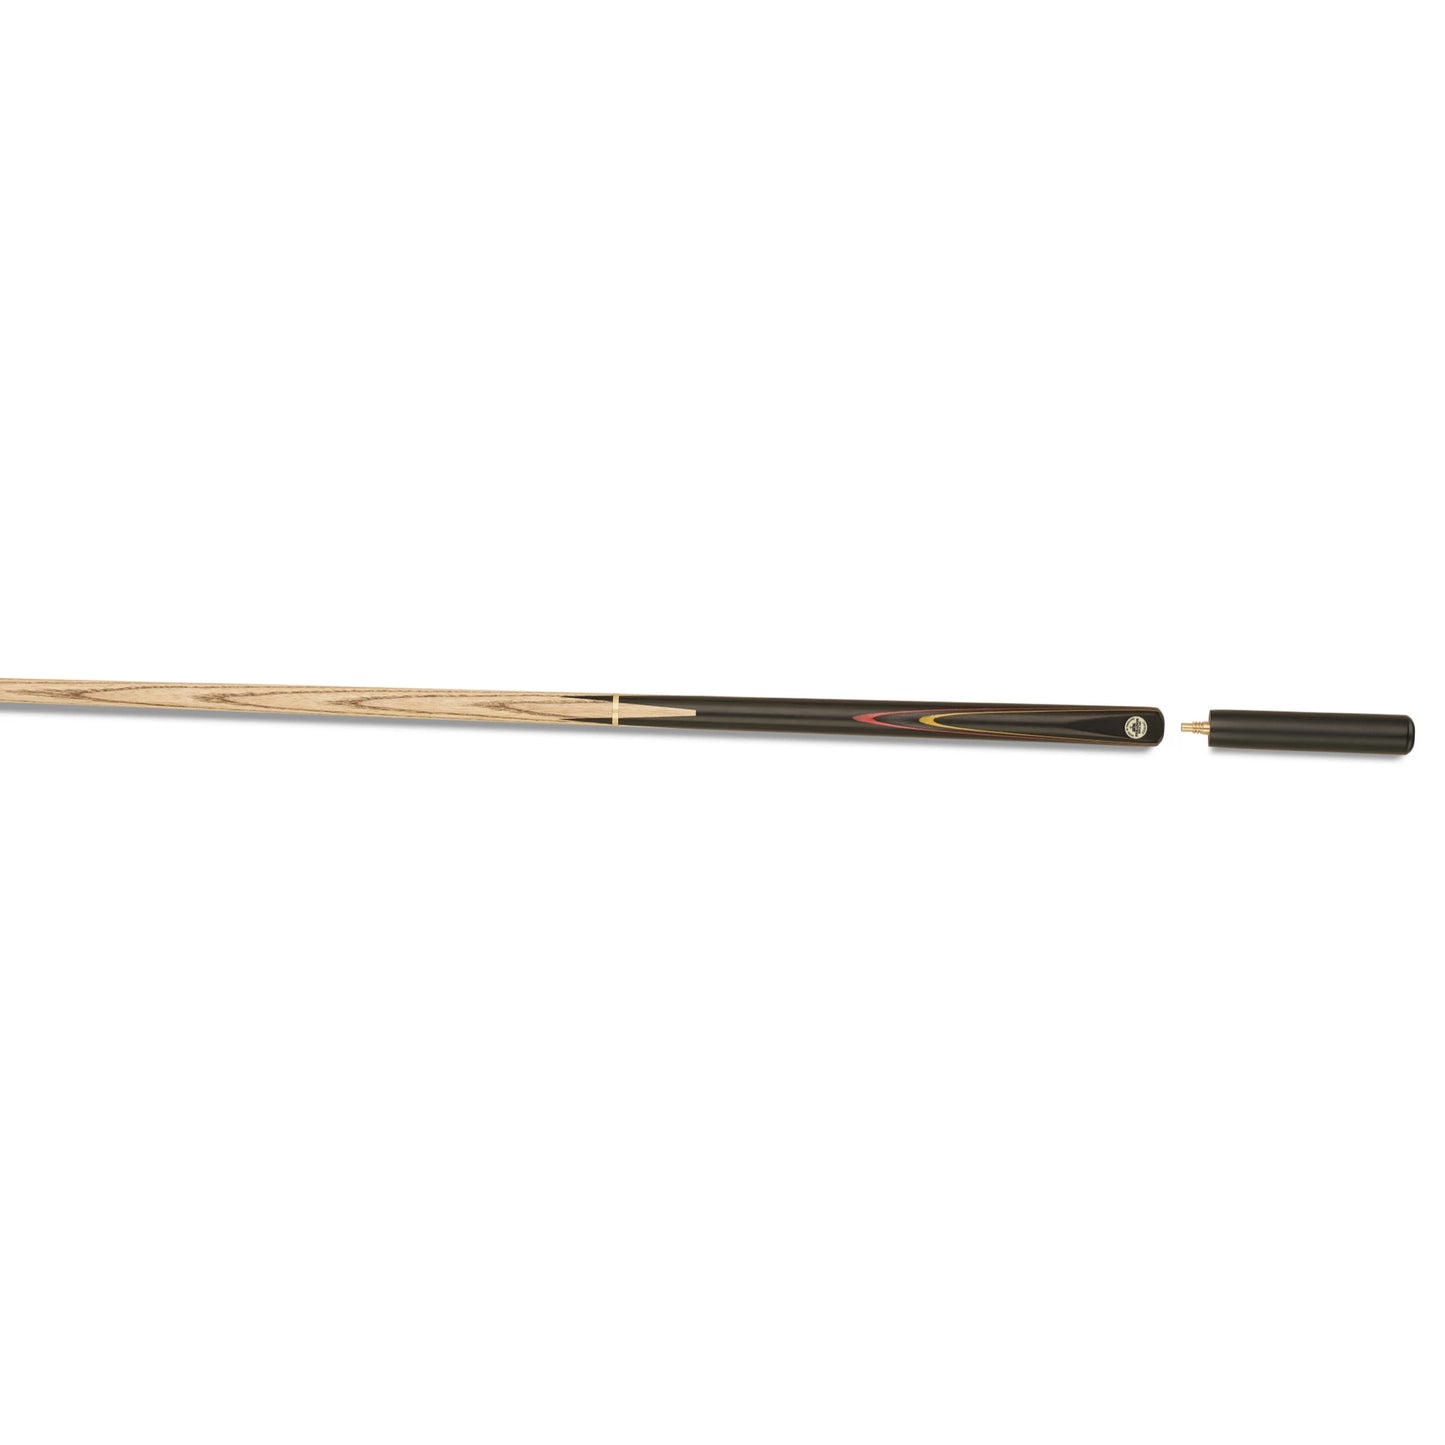 Peradon Zodiac ¾ Jointed 8 Ball Pool Cue with Mini Butt